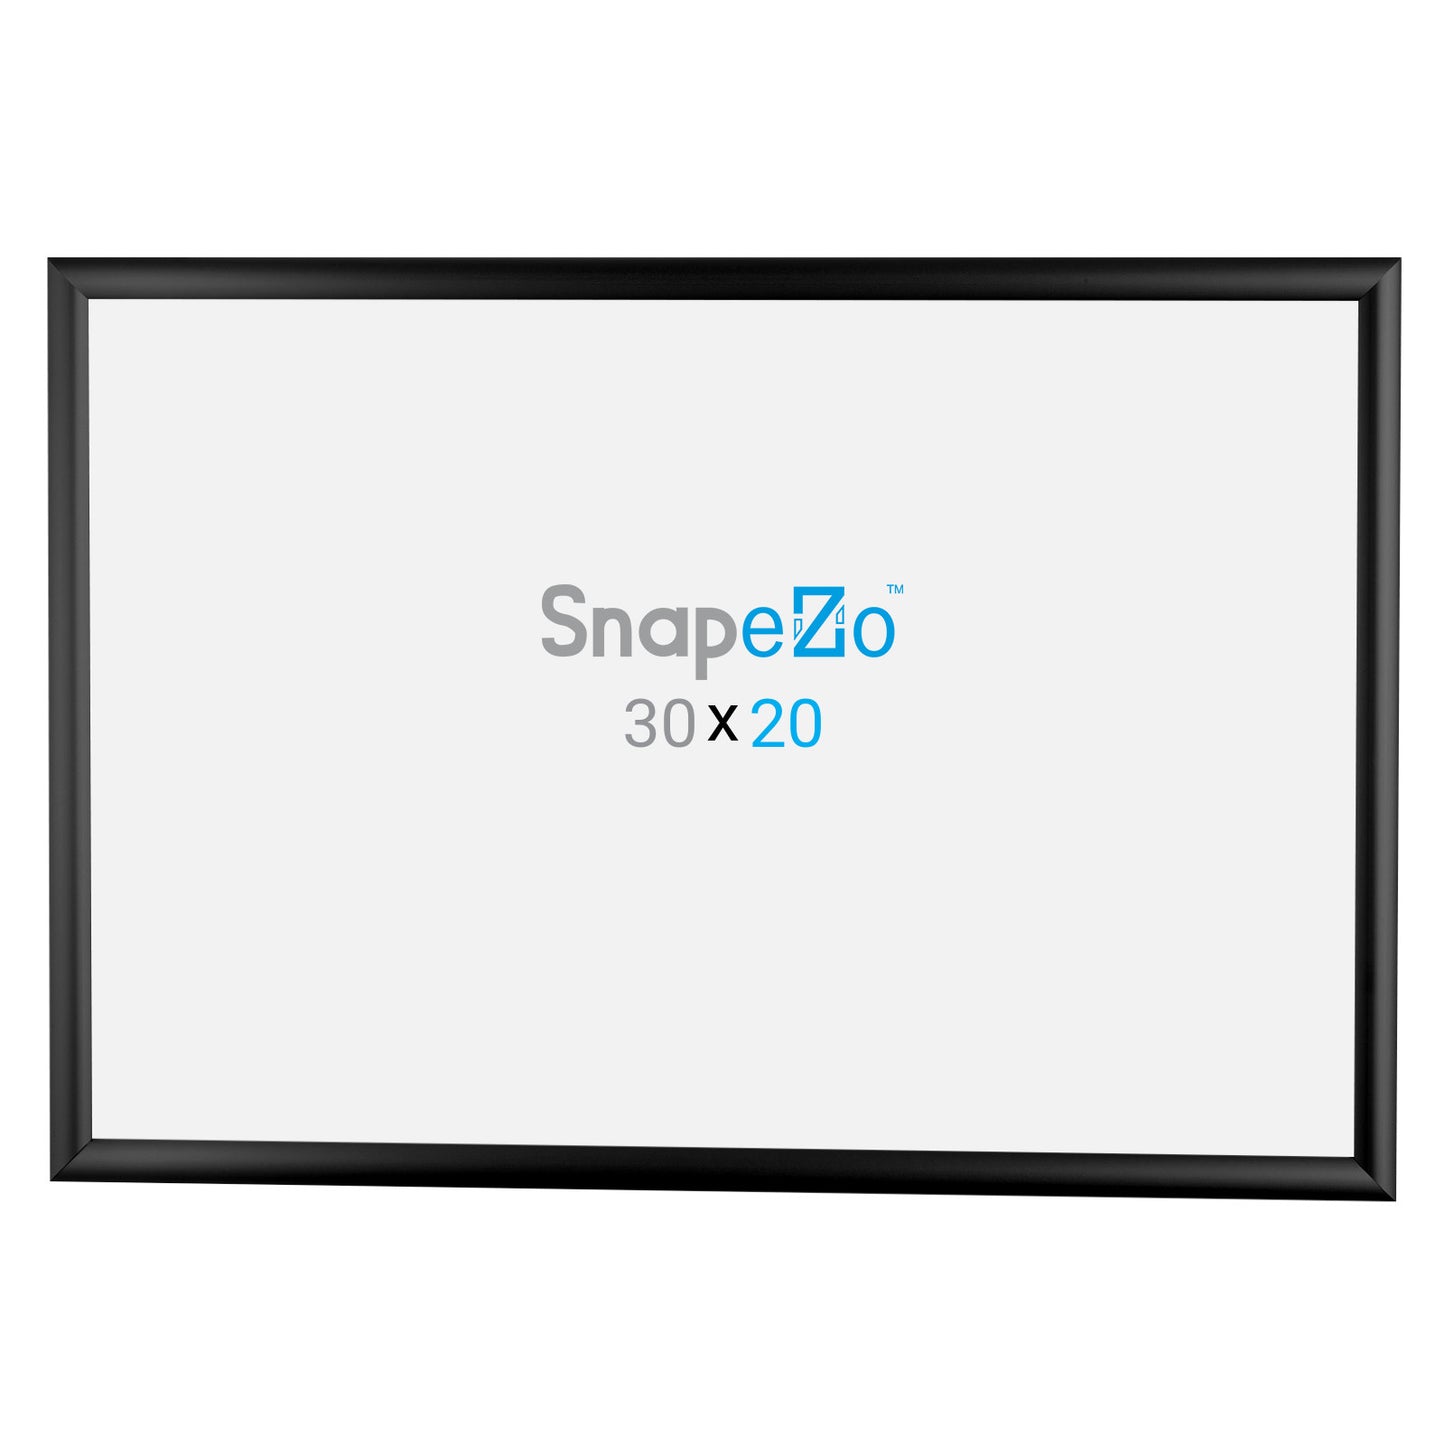 10 Case Pack of Snapezo® of Black 20x30 Poster Frame - 1" Profile